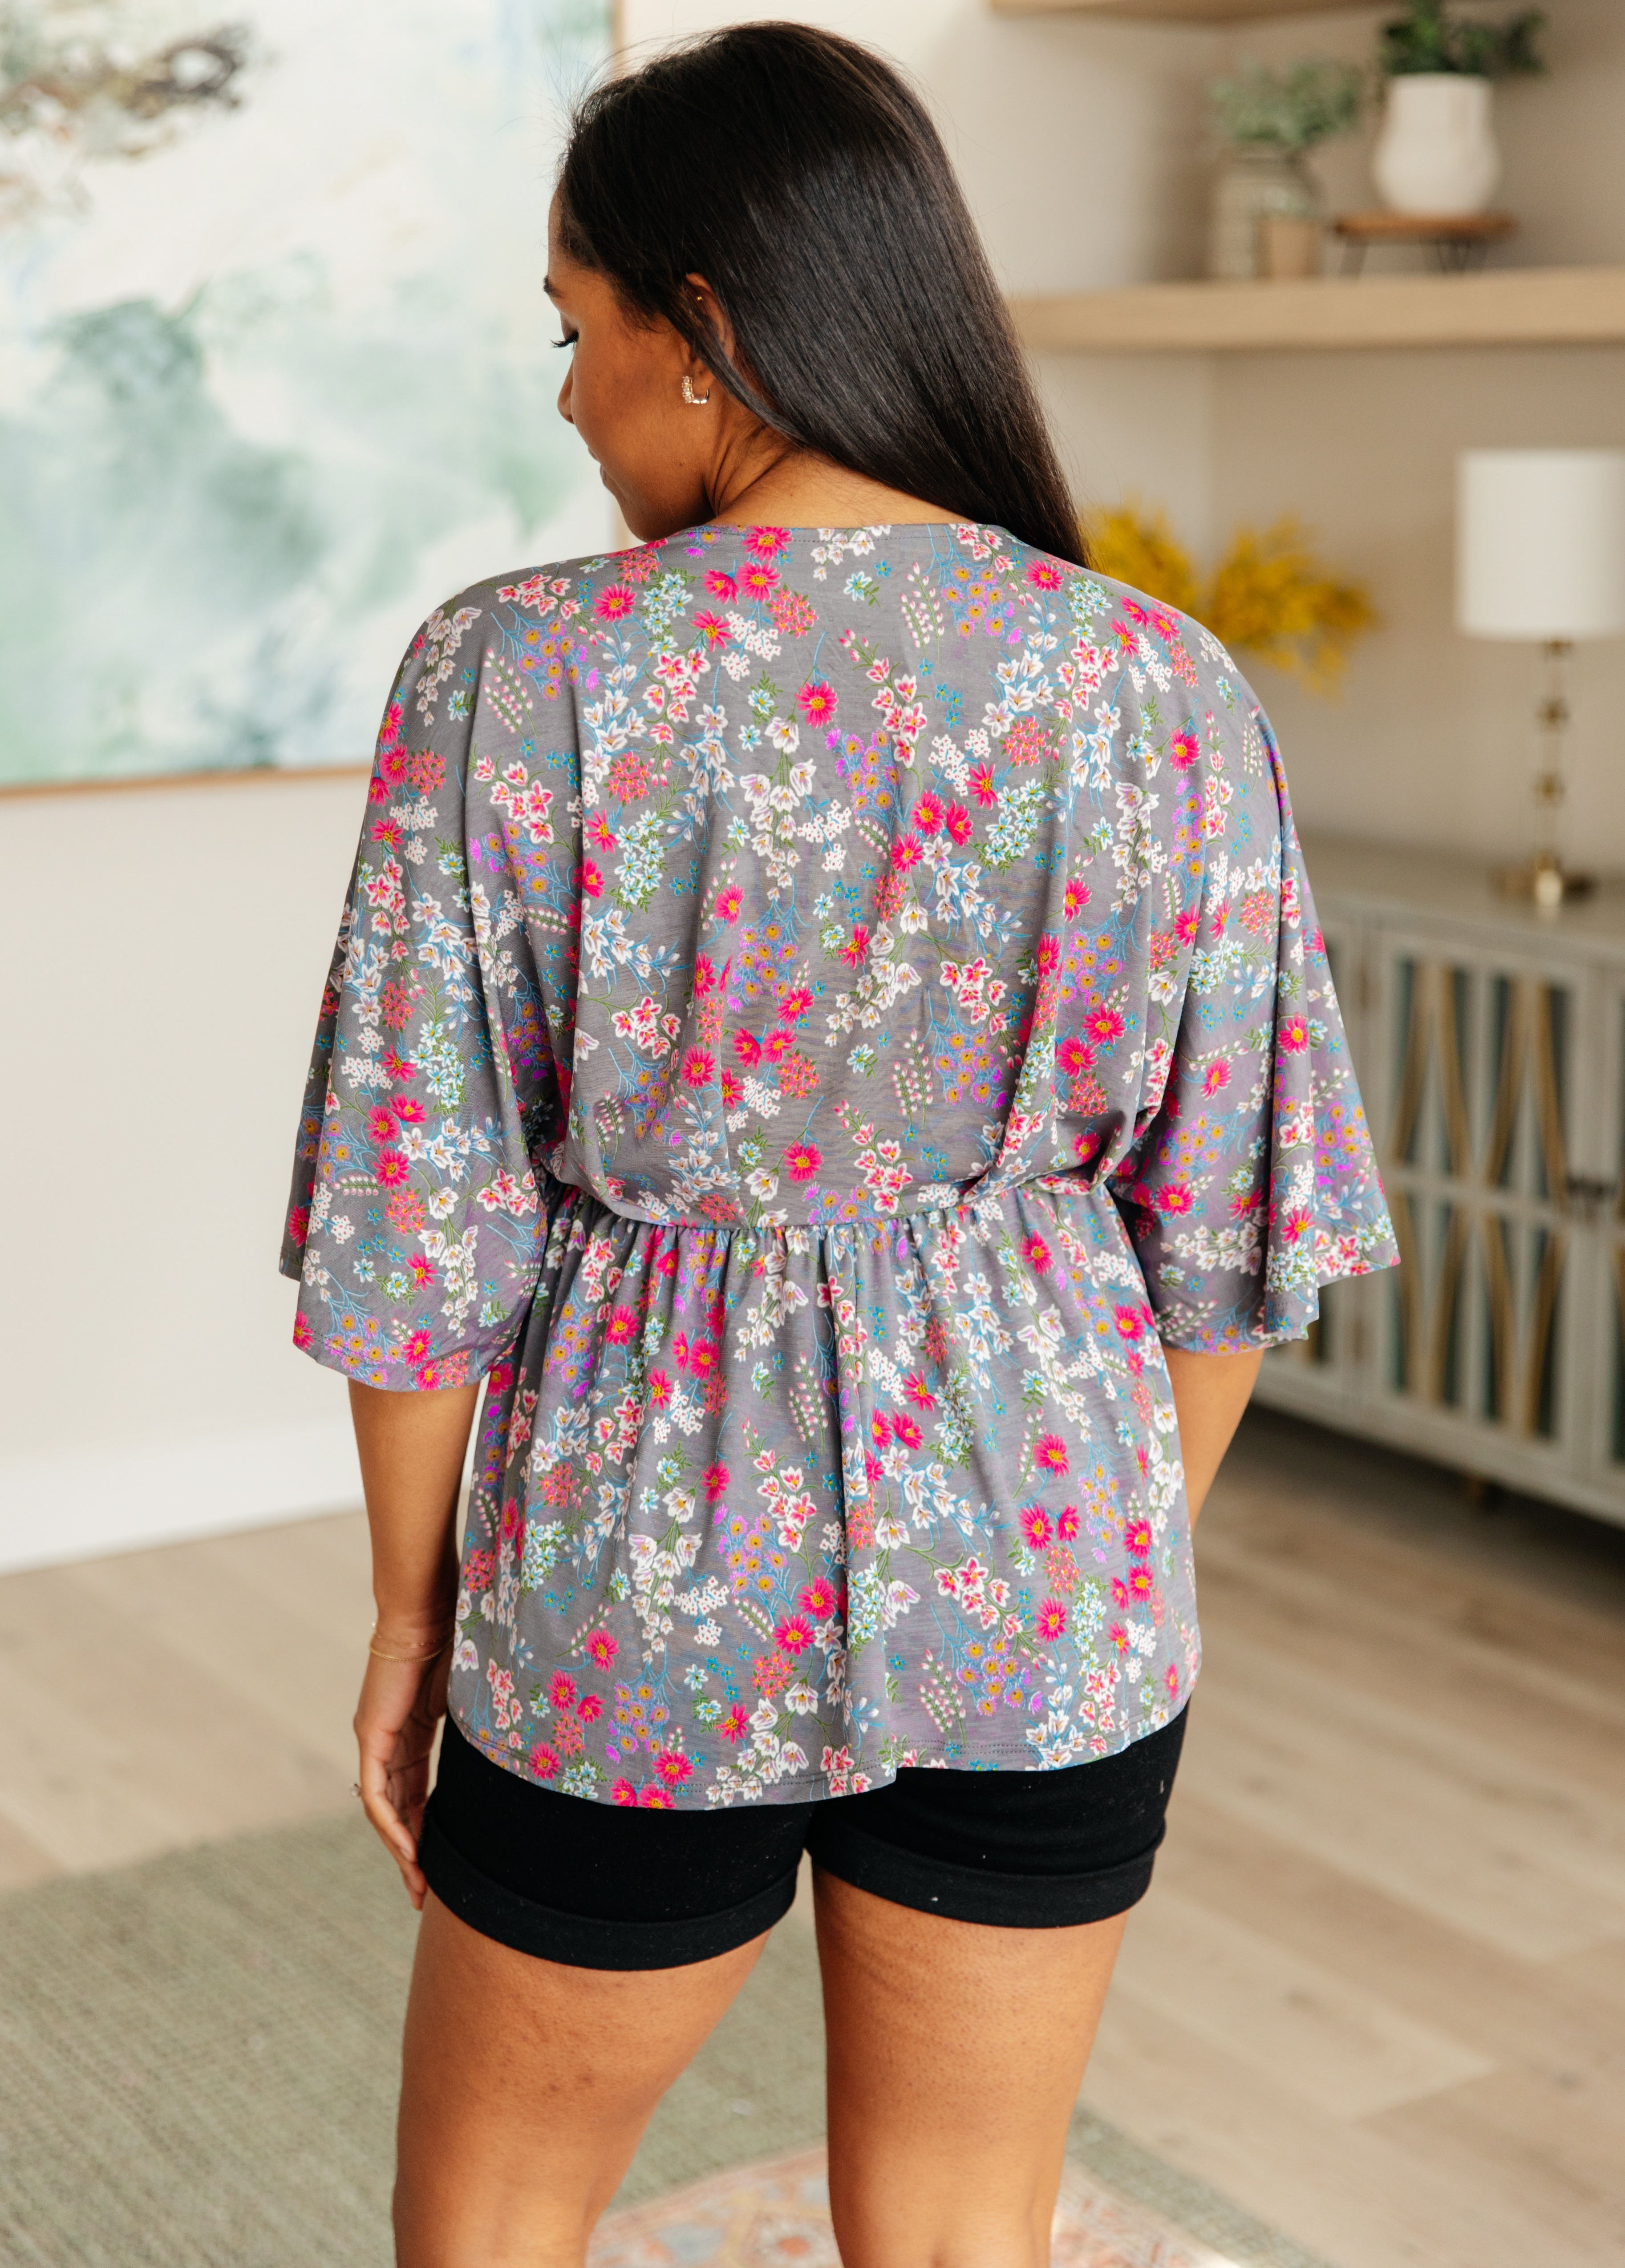 Dreamer Peplum Top in Grey and Pink Floral Tops Ave Shops   